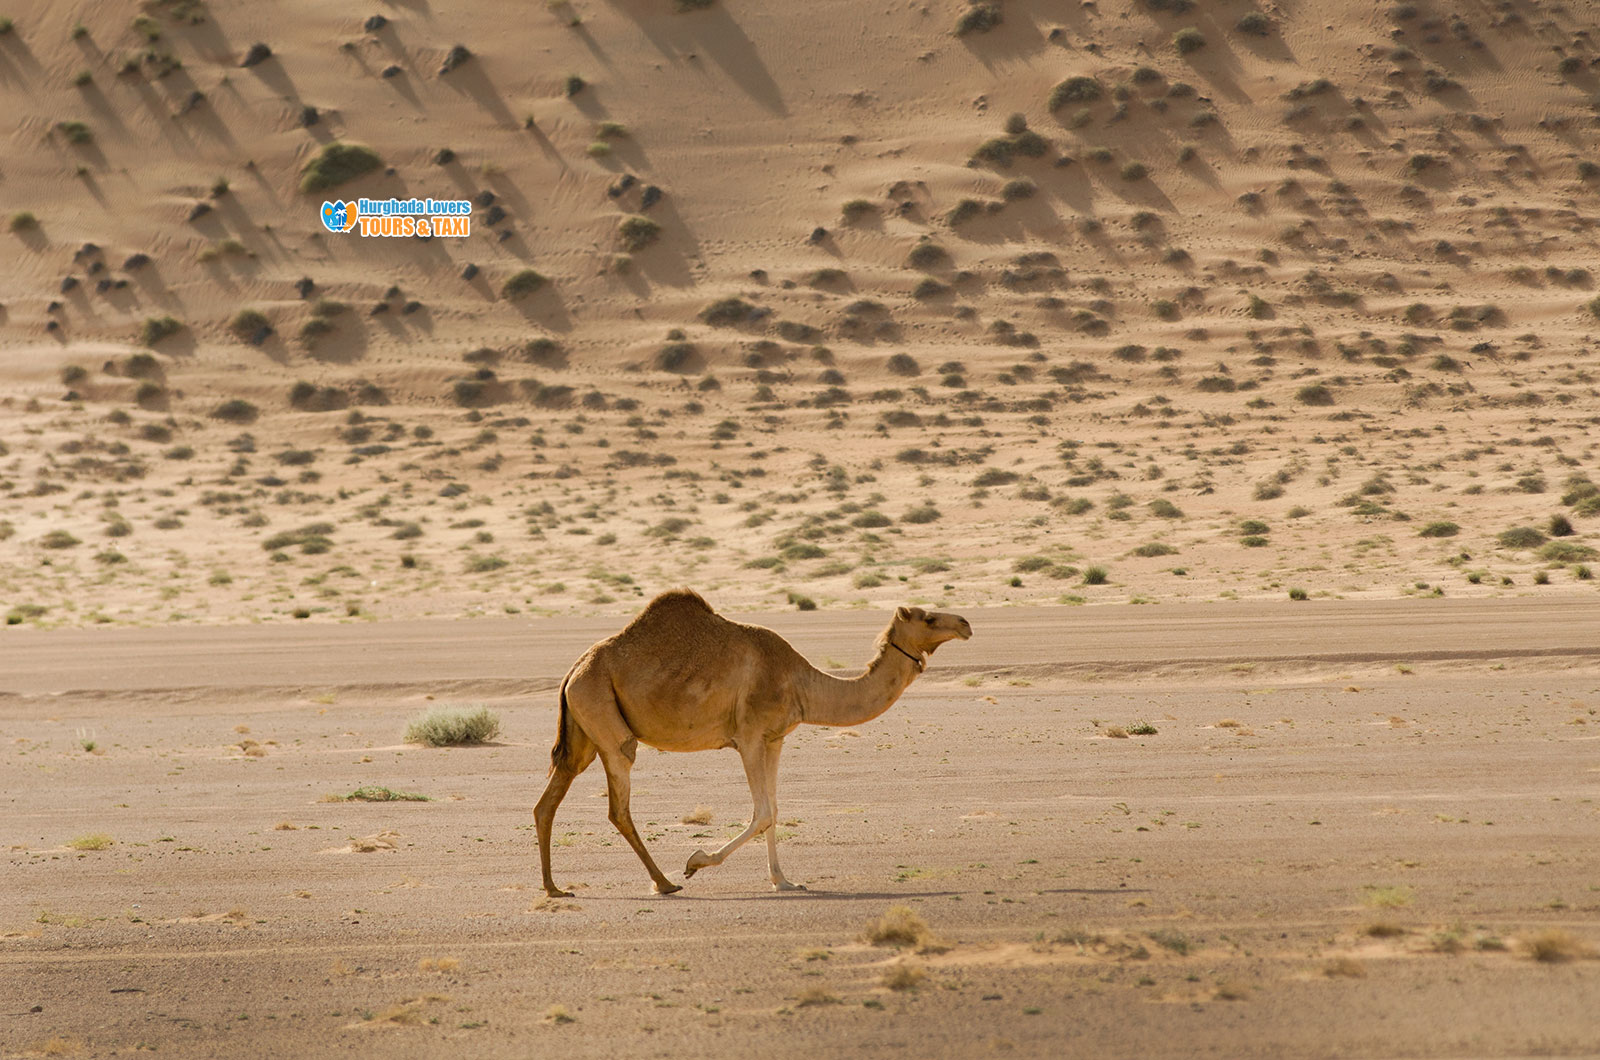 Egypt Desert Animals | Types of Fauna and Wildlife in Egyptian